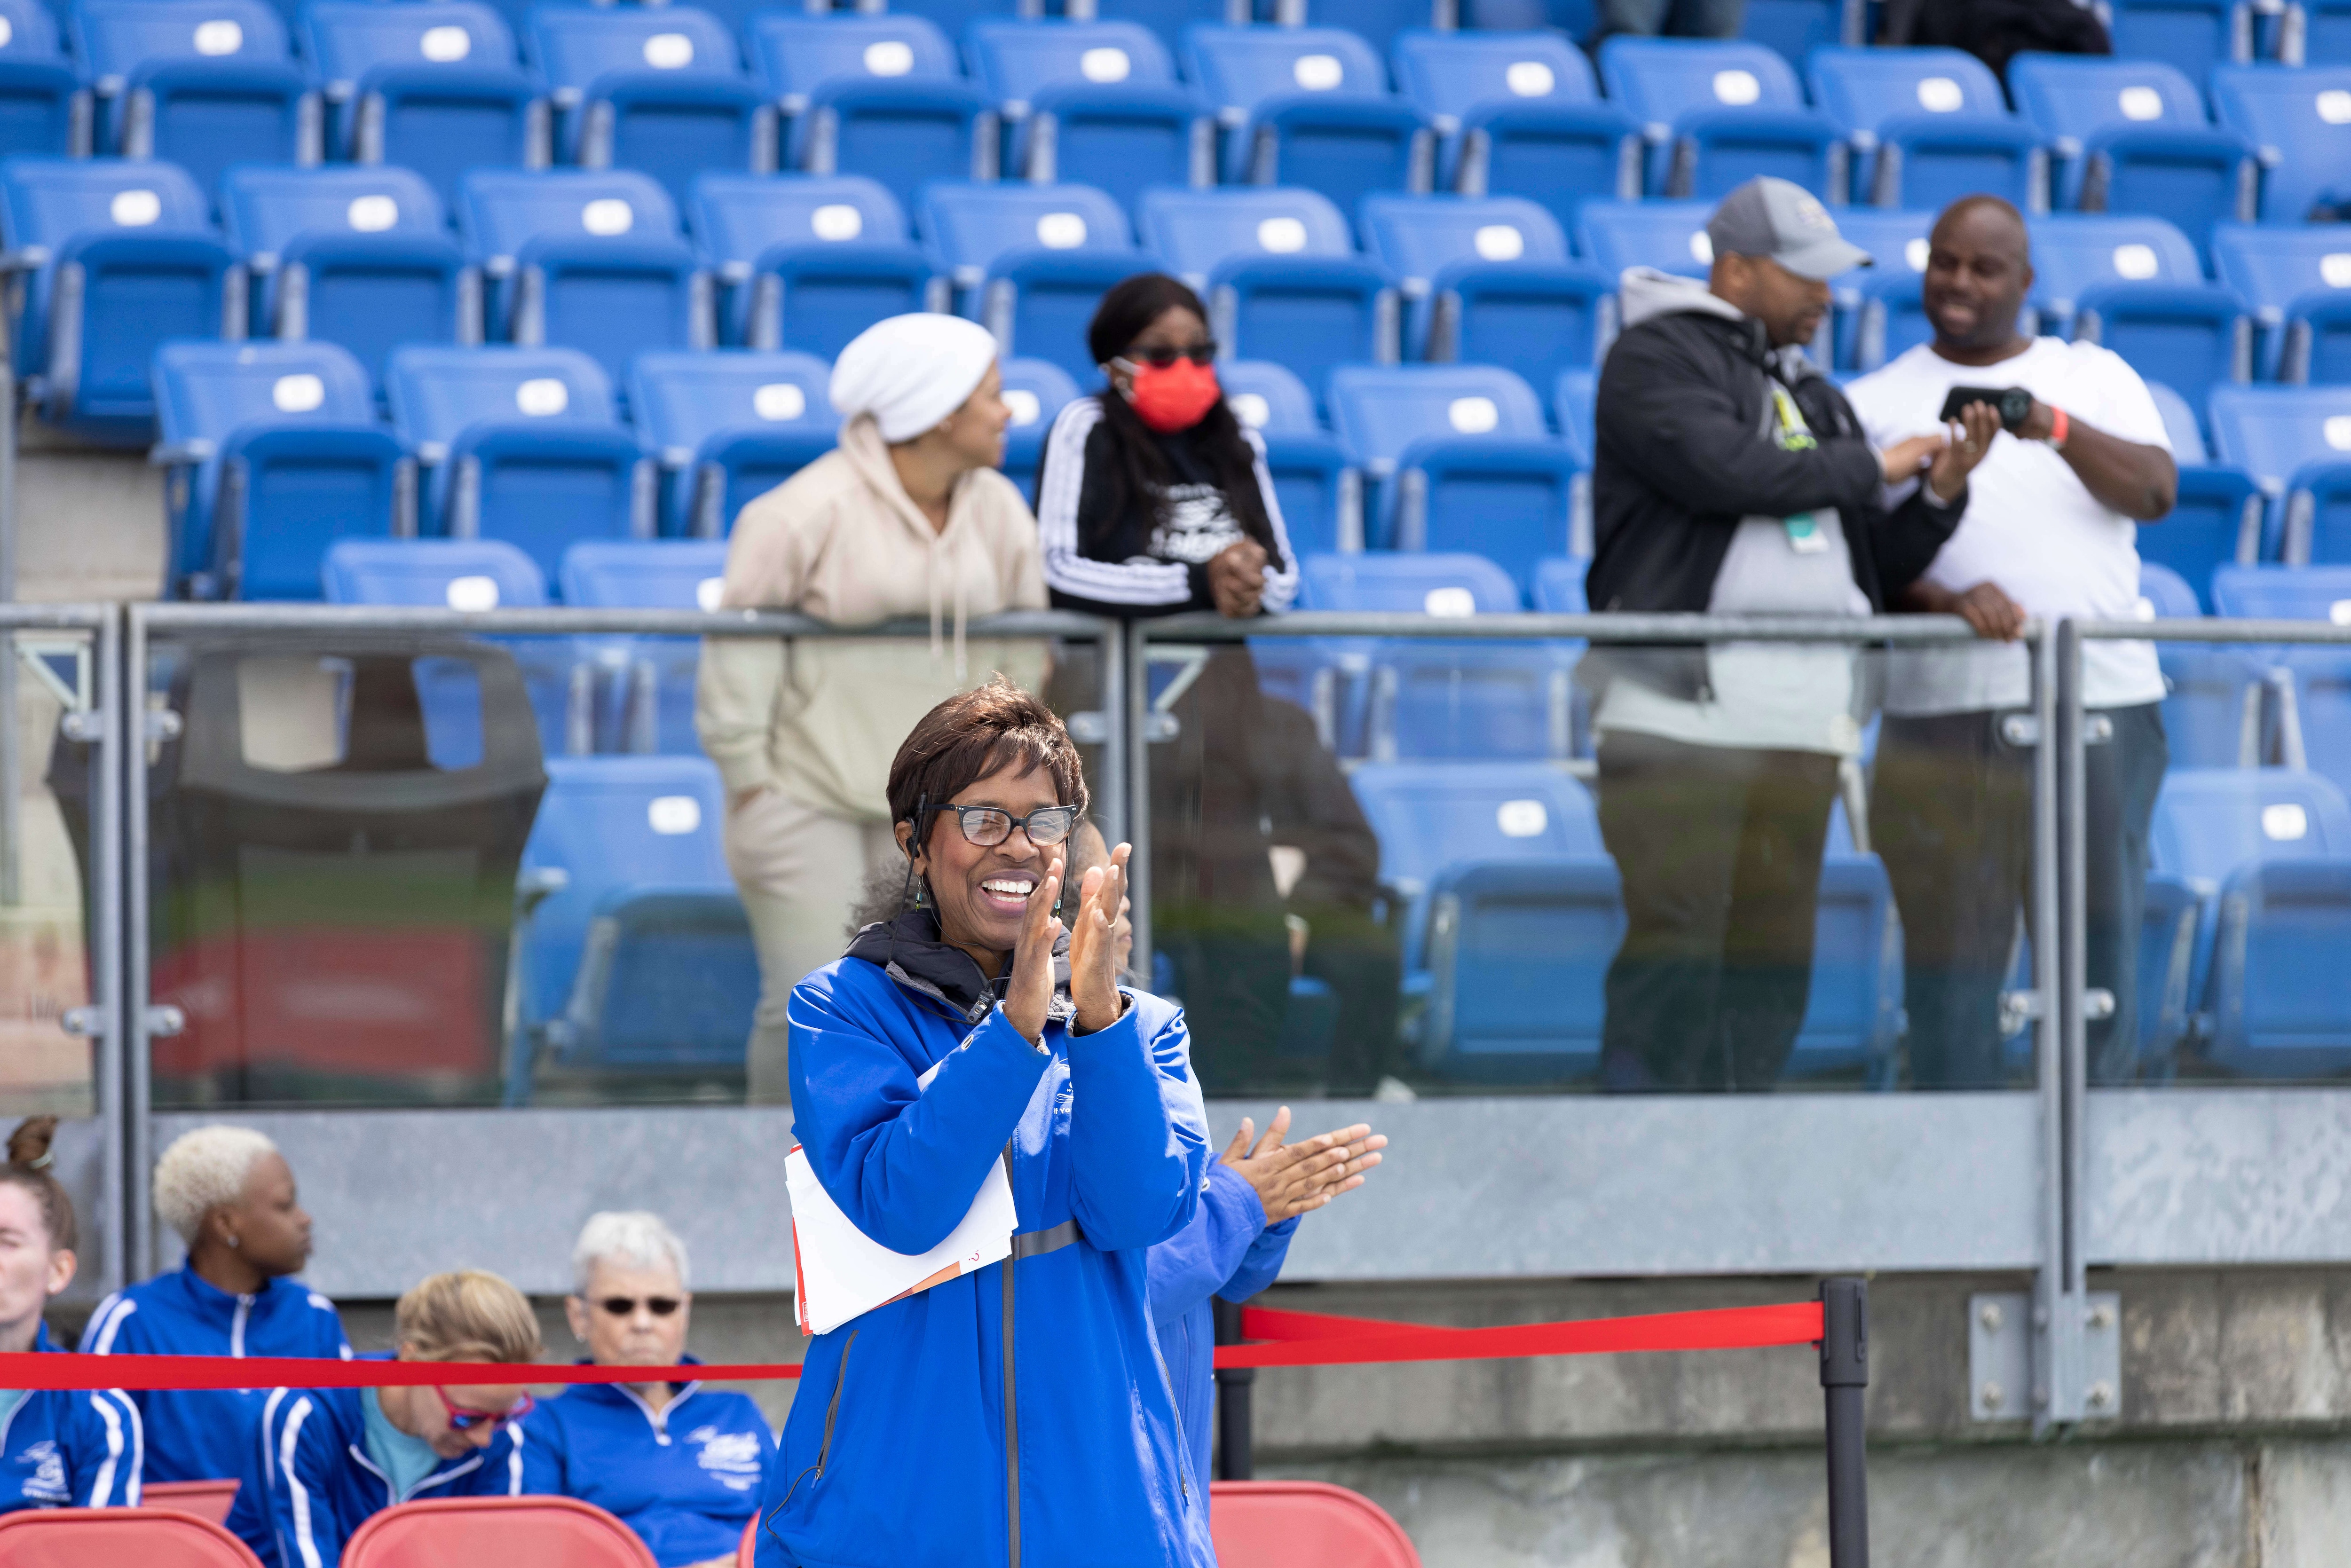 Cheryl Toussaint cheers for athletes at the Colgate Women's Games.